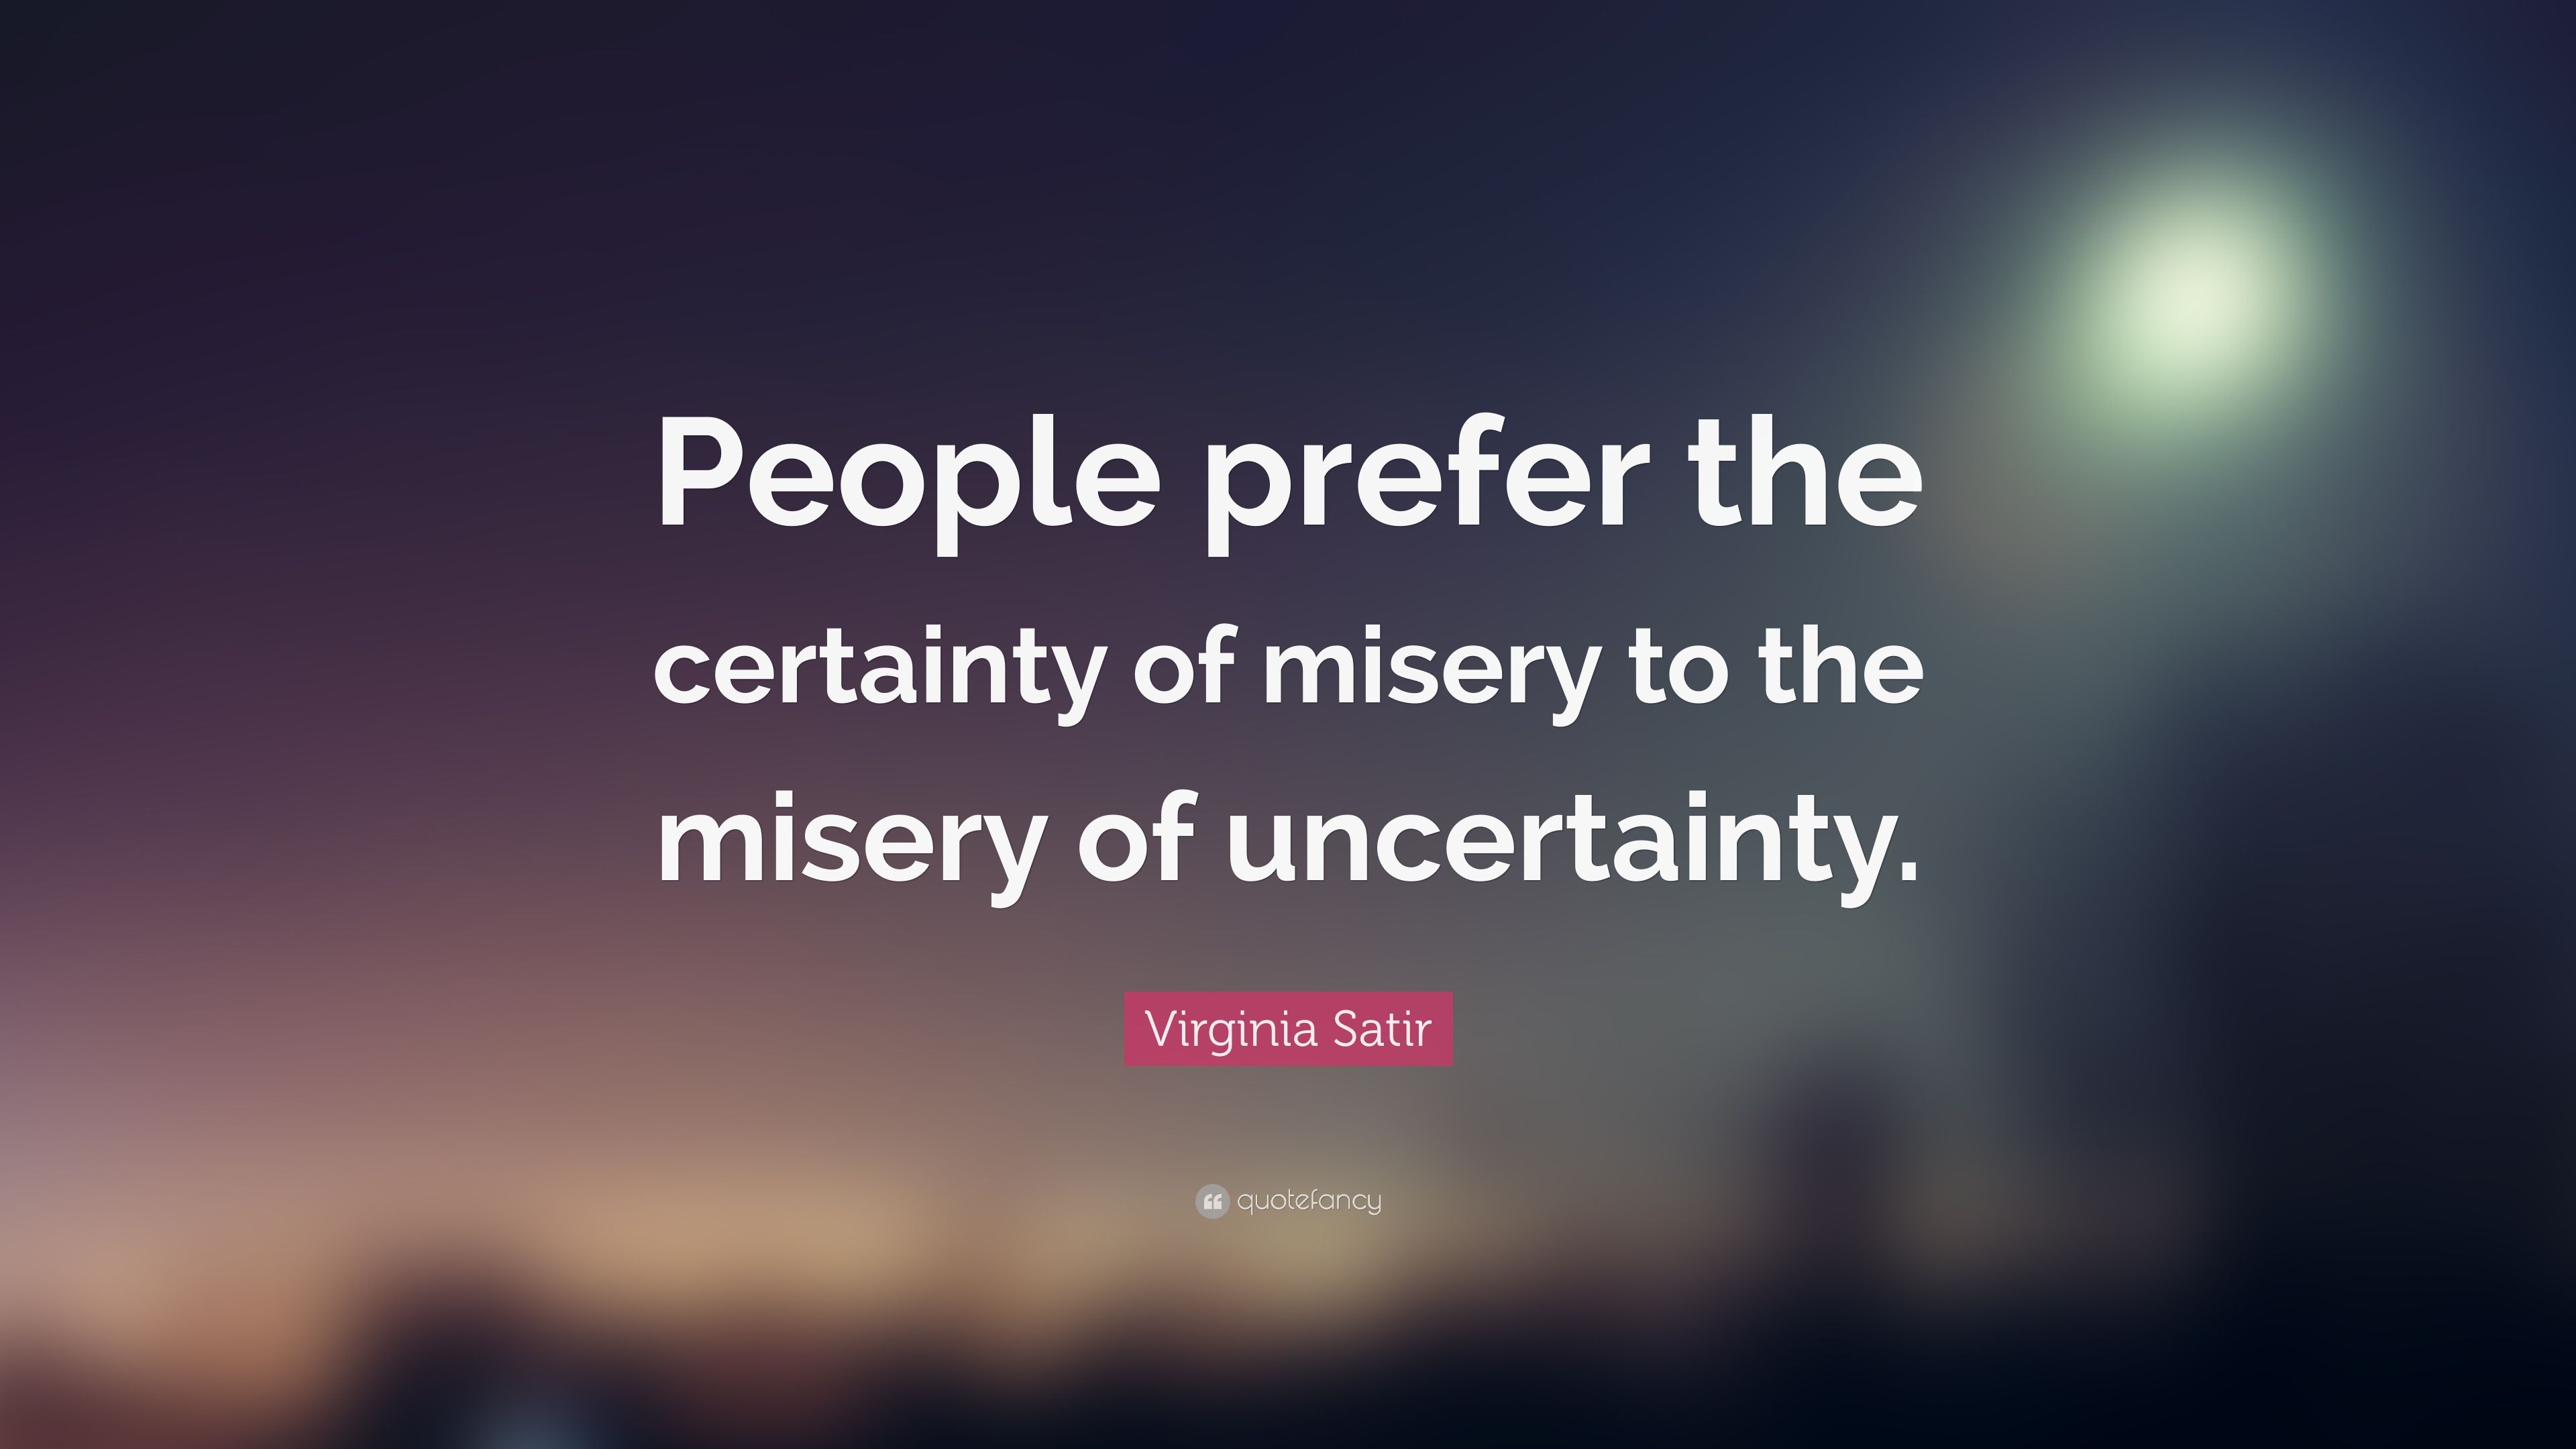 Virginia Satir Quote: “People prefer the certainty of misery to